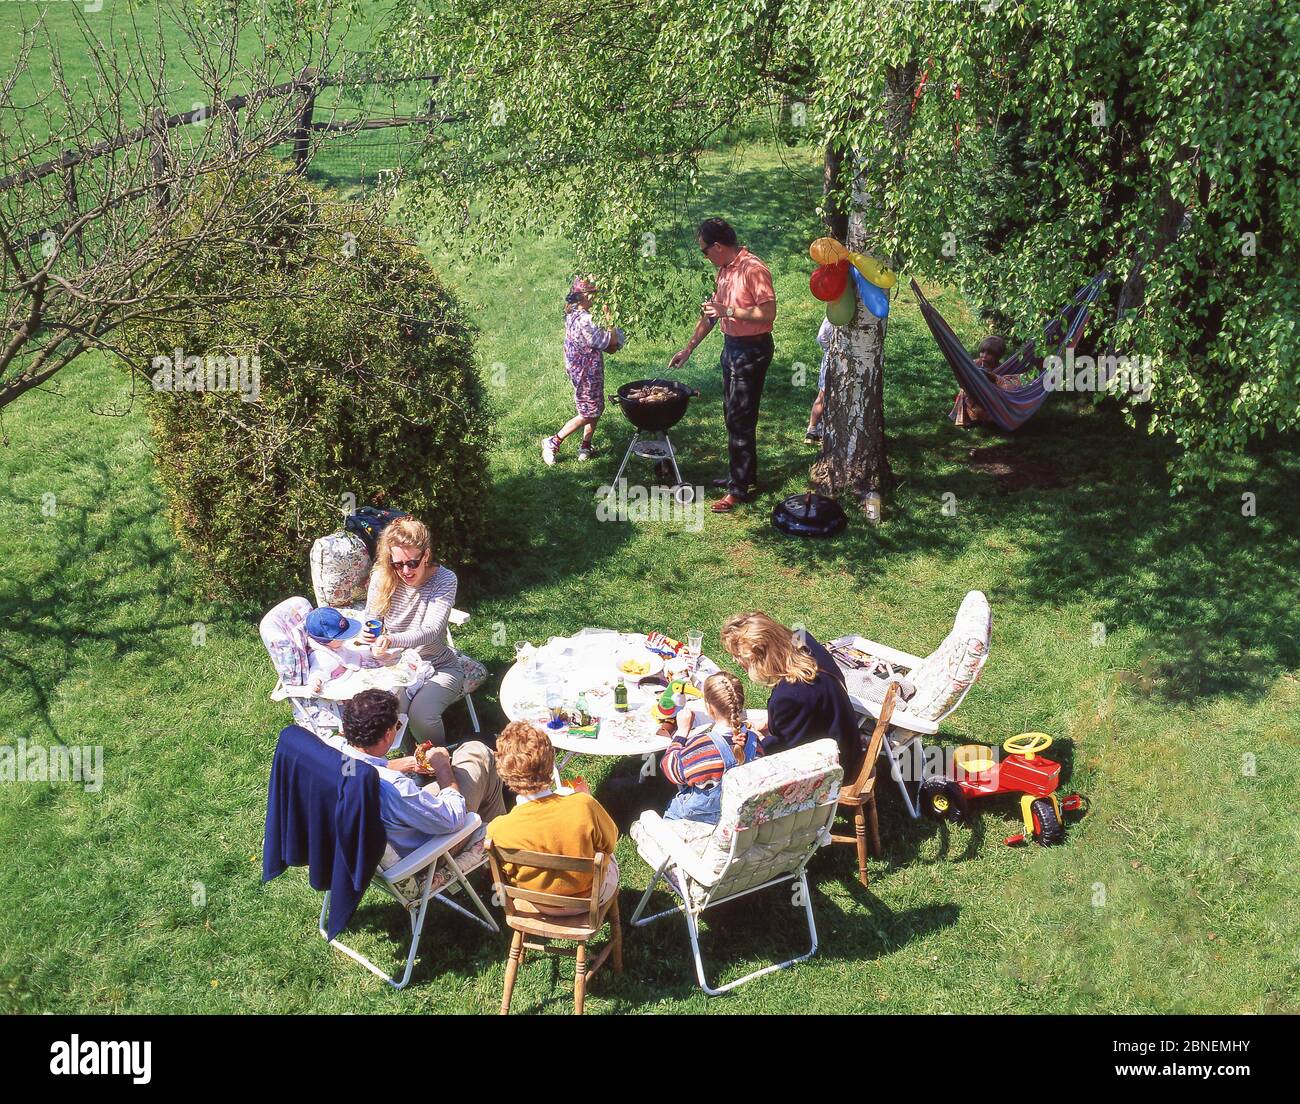 Barbecue familial dans le jardin, Winkfield, Berkshire, Angleterre, Royaume-Uni Banque D'Images